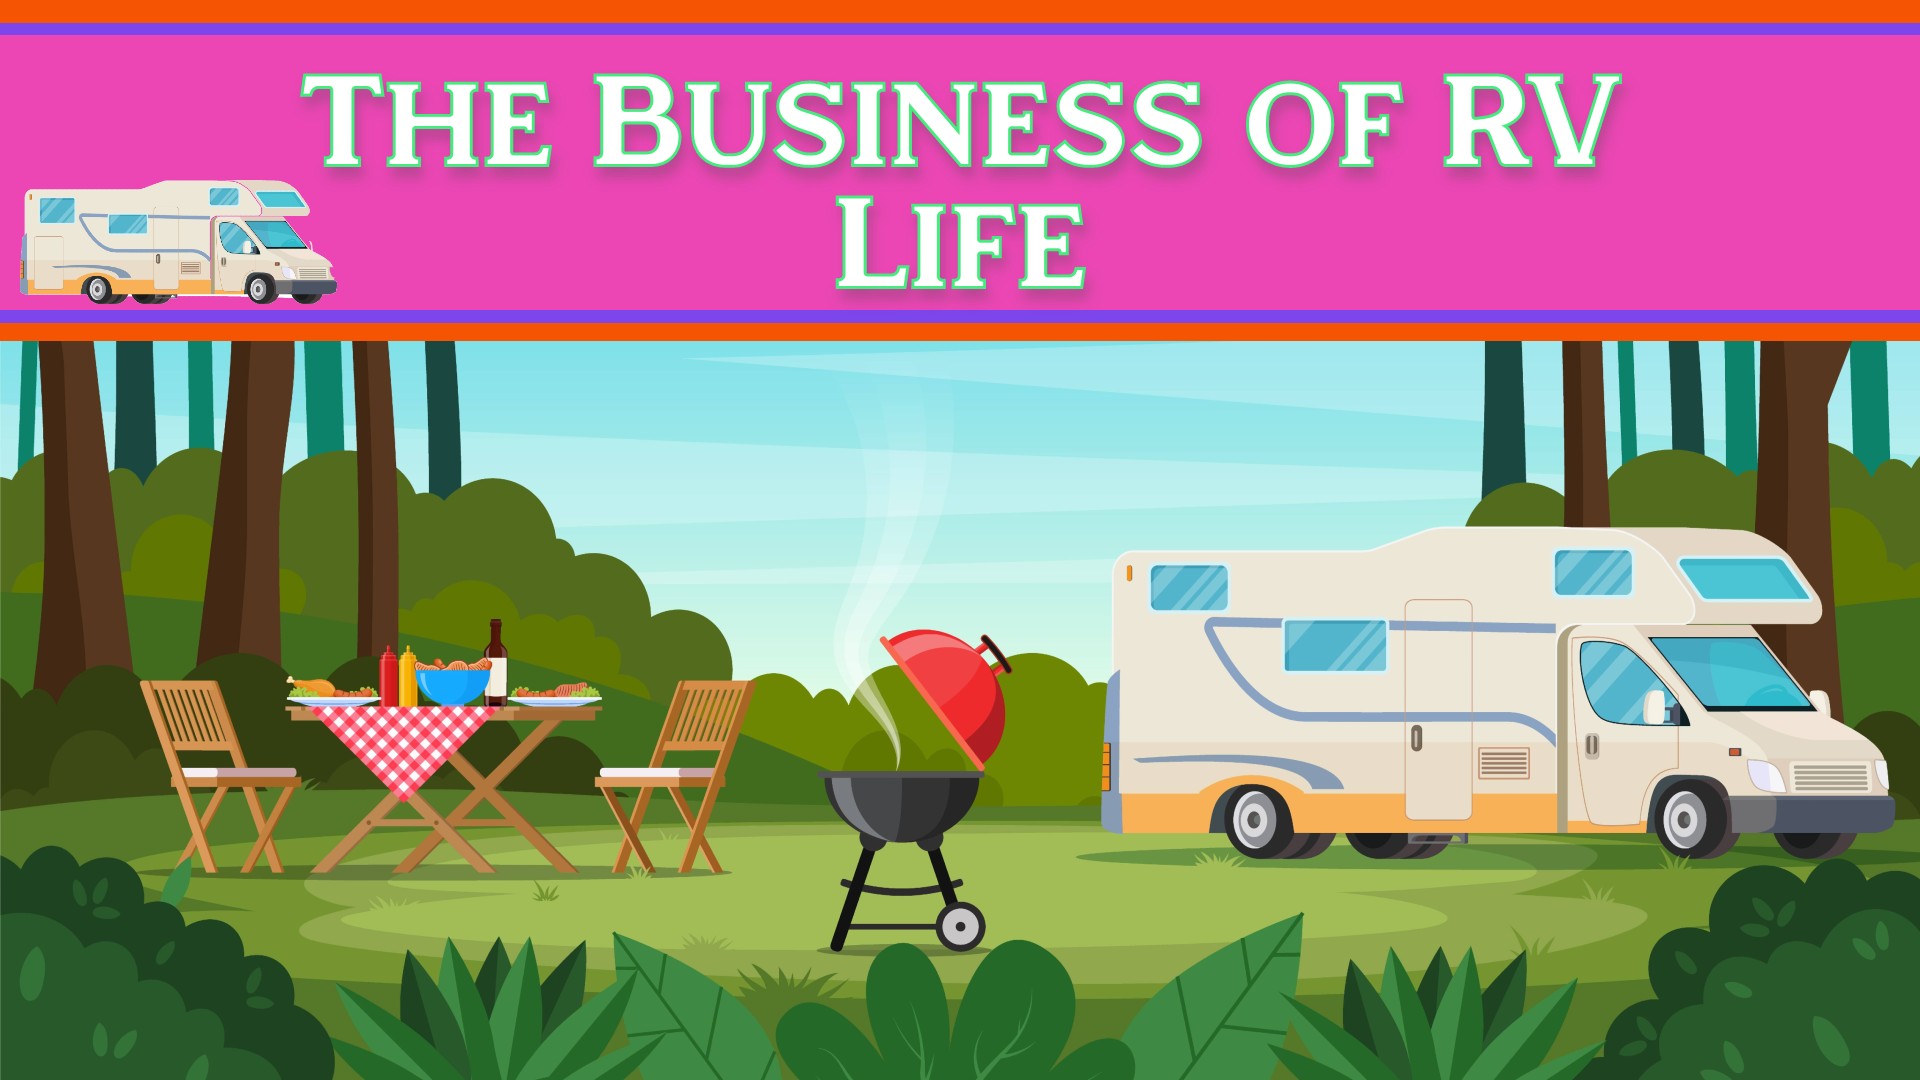 The Business of RV Life